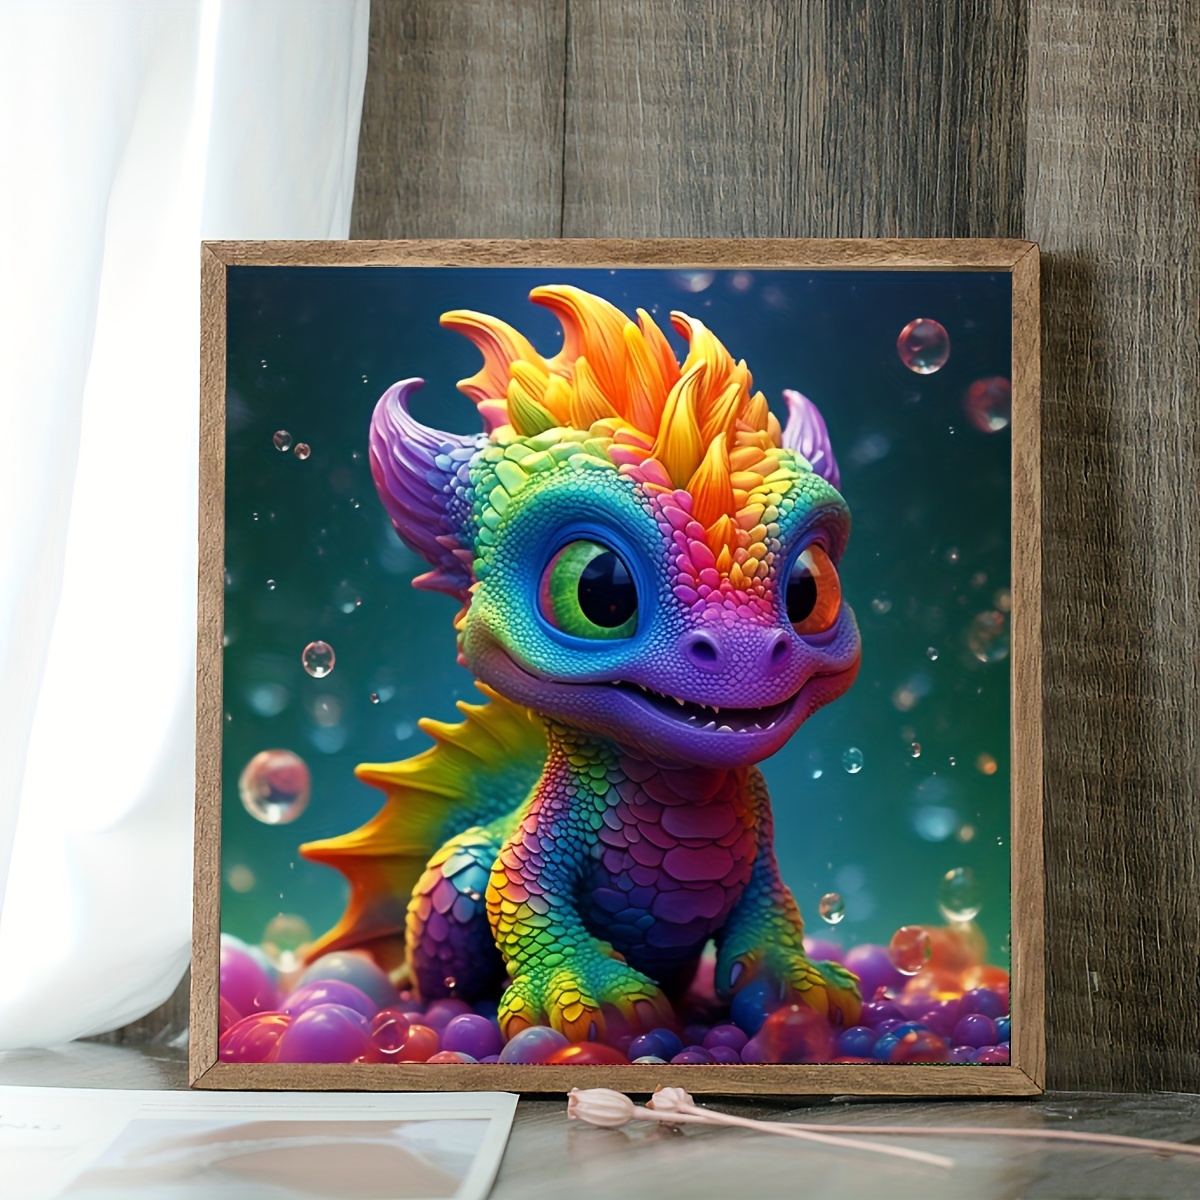  Modern Girl Dragon Diamond Painting Kits DIY Adult Children  Cartoon Diamond Painting Kits - Suitable for Natural Aesthetic Room Decor  and Gifts 8x12Inch